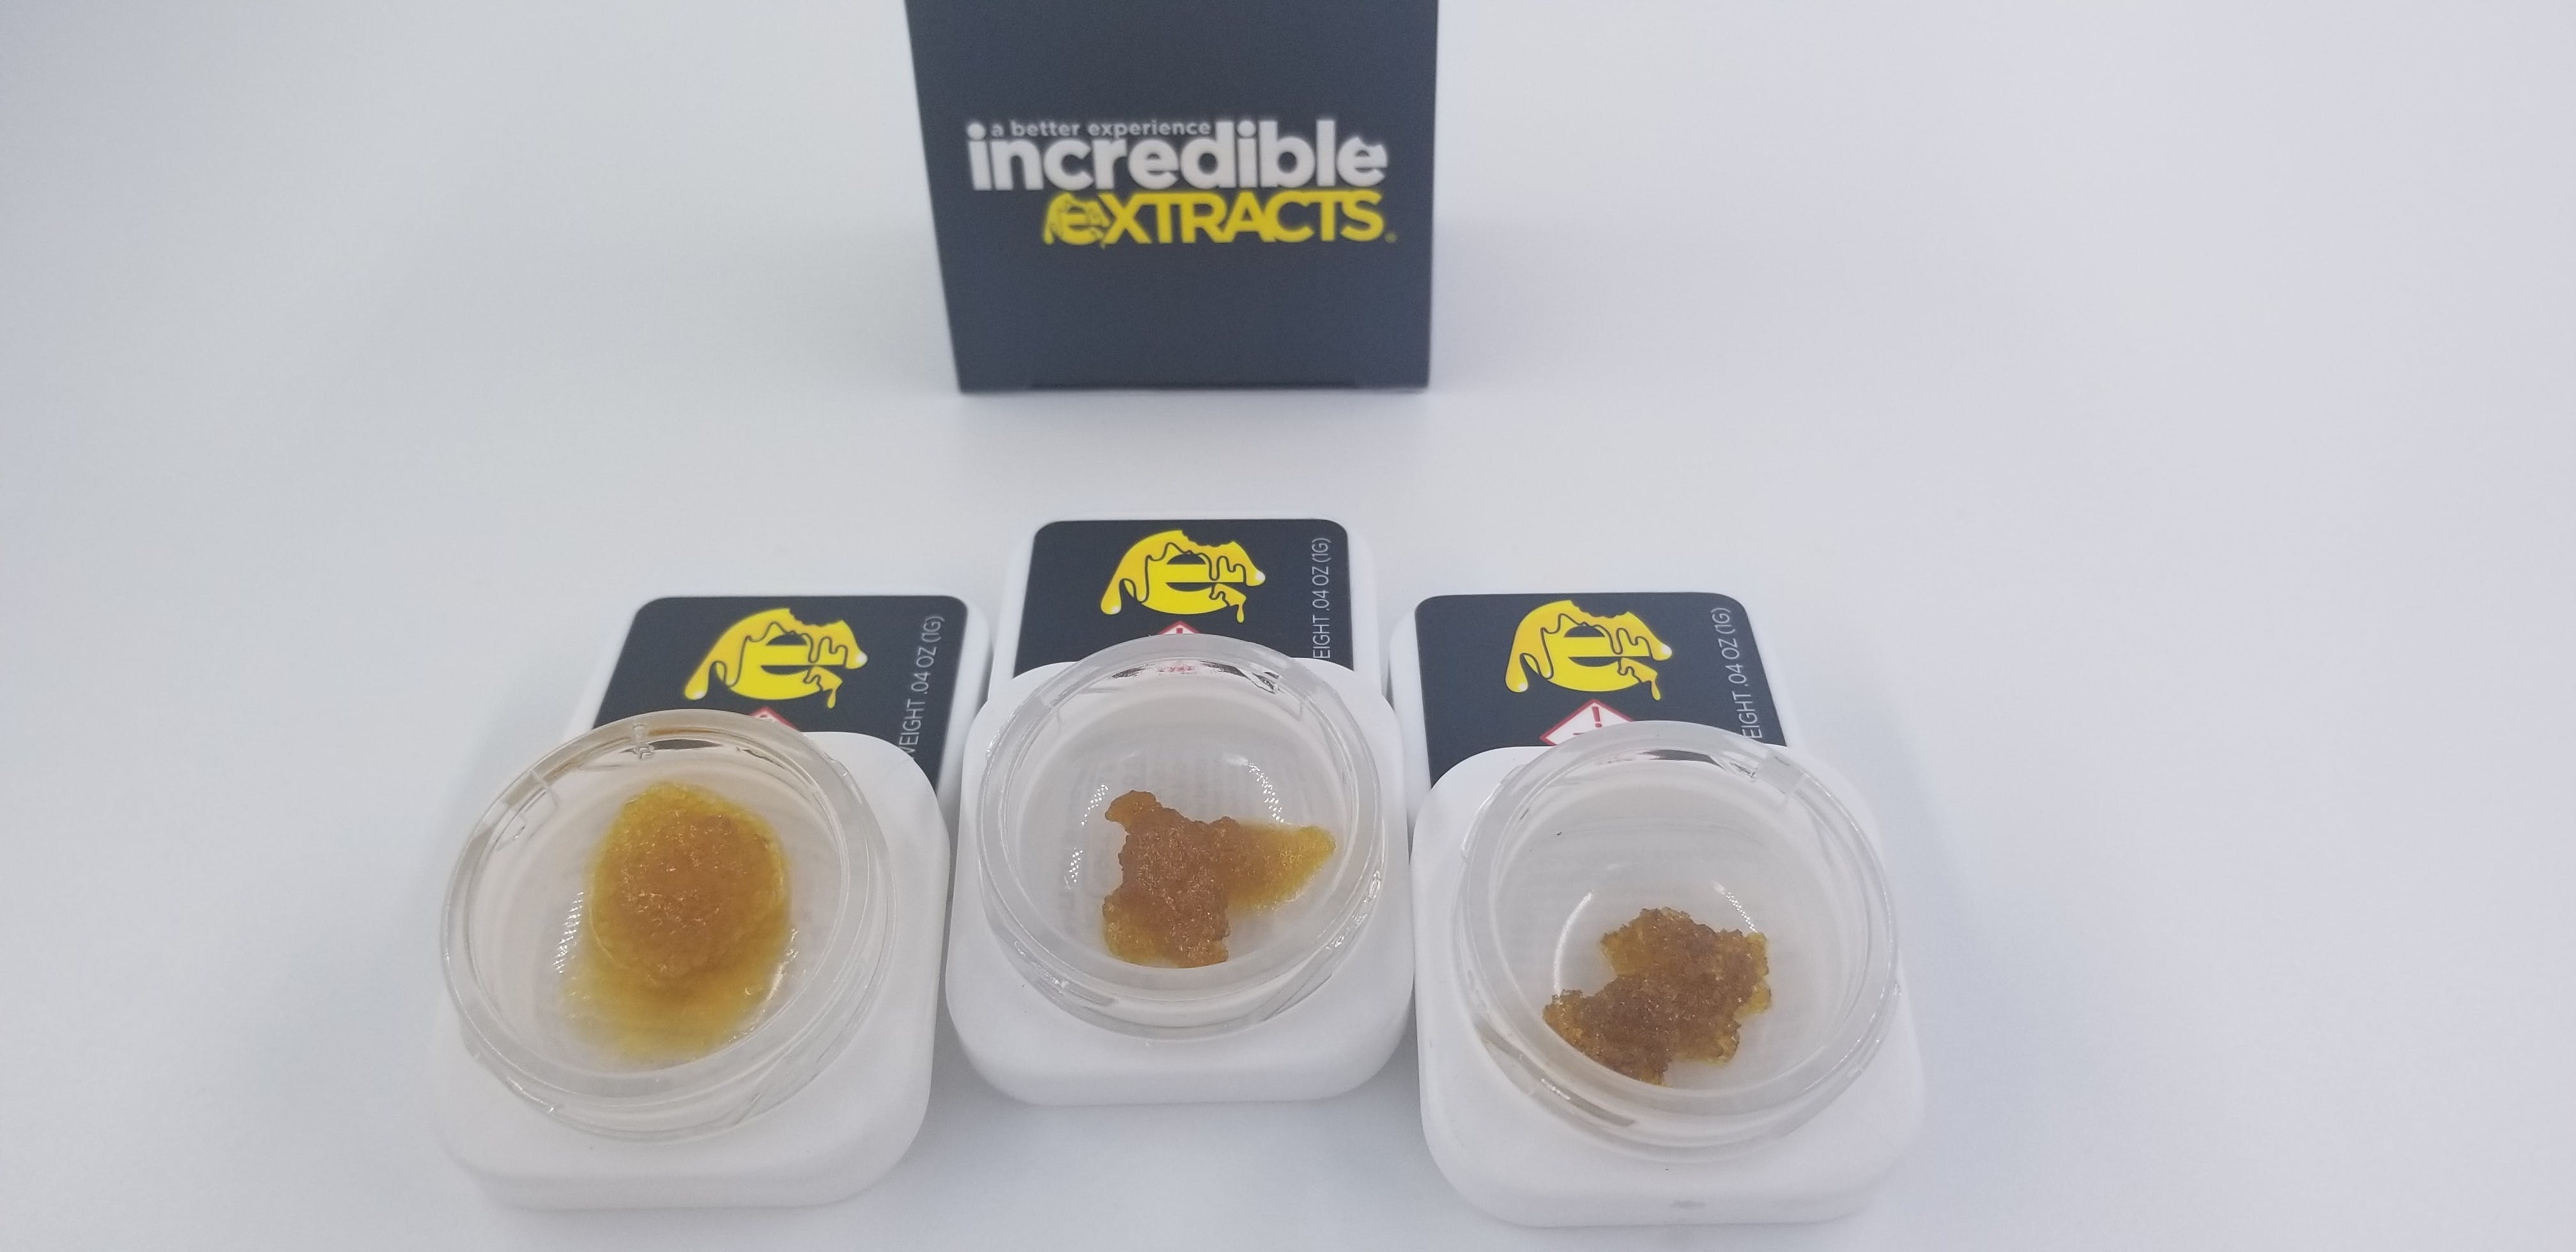 concentrate-incredible-extracts-black-label-live-resin-single-grams